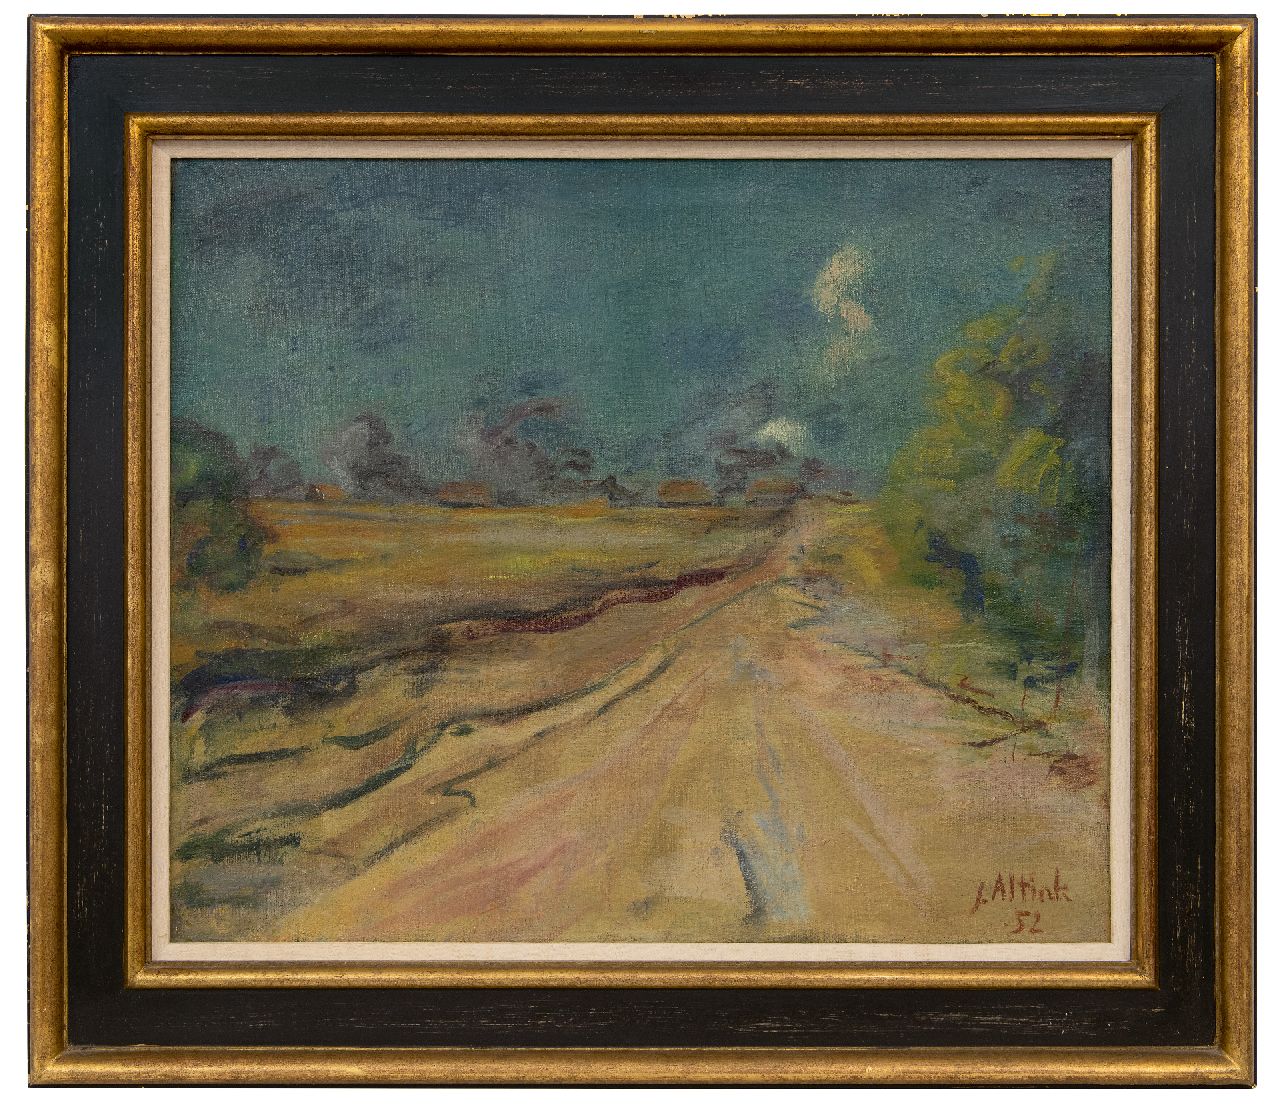 Altink J.  | Jan Altink | Paintings offered for sale | Country road in the summer, oil on canvas 50.3 x 60.1 cm, signed l.r. and dated '52